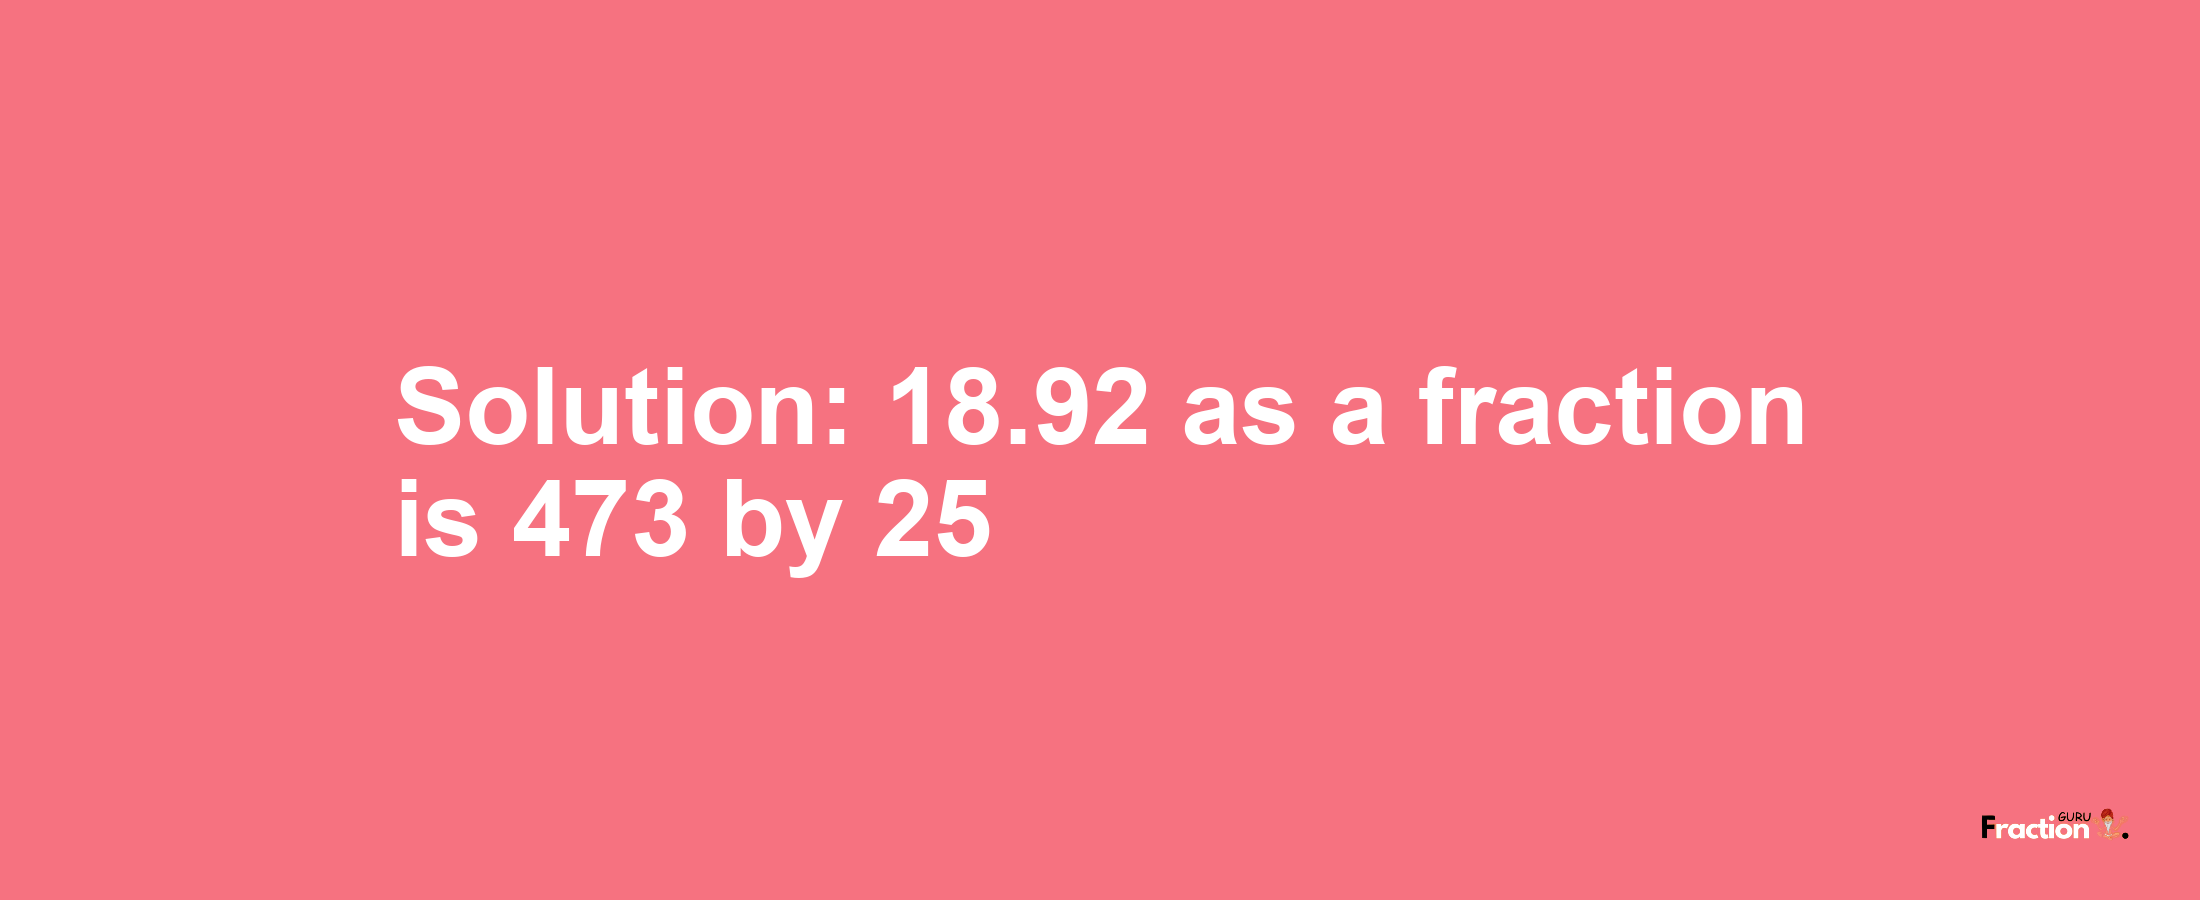 Solution:18.92 as a fraction is 473/25